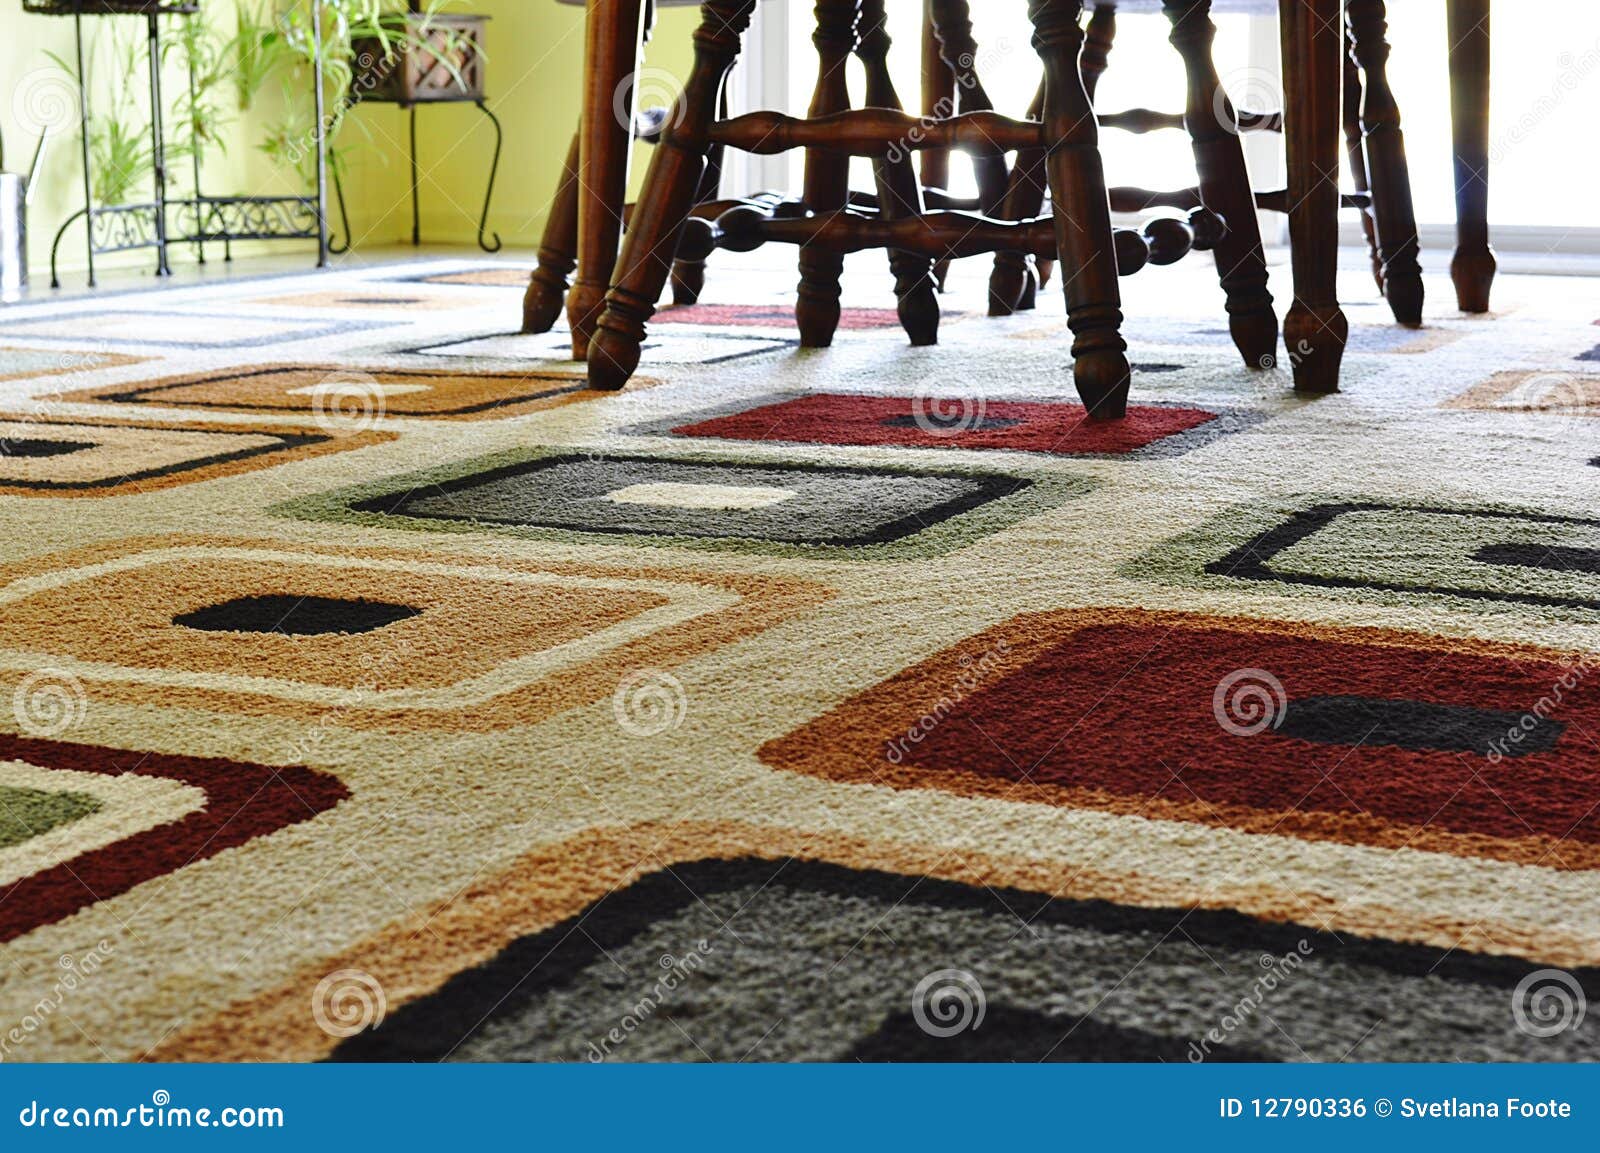 Carpet in dining room stock photo. Image of dining, furniture - 12790336